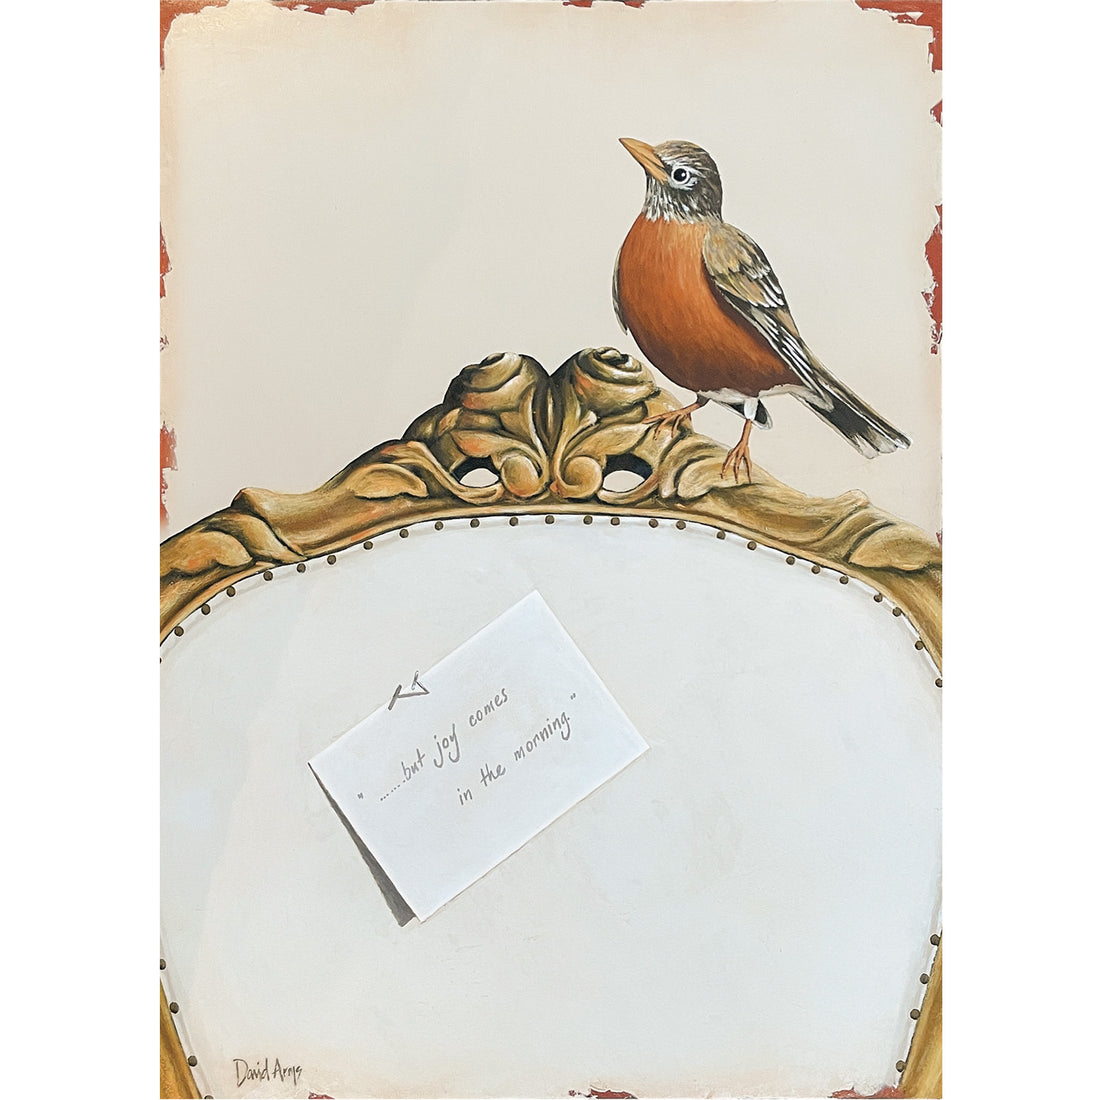 An illustration of an orange and brown robin resting on the ornate back of a white upholstered chair with a note pinned to it reading &quot;...but joy comes in the morning&quot;, over a light  tan background.